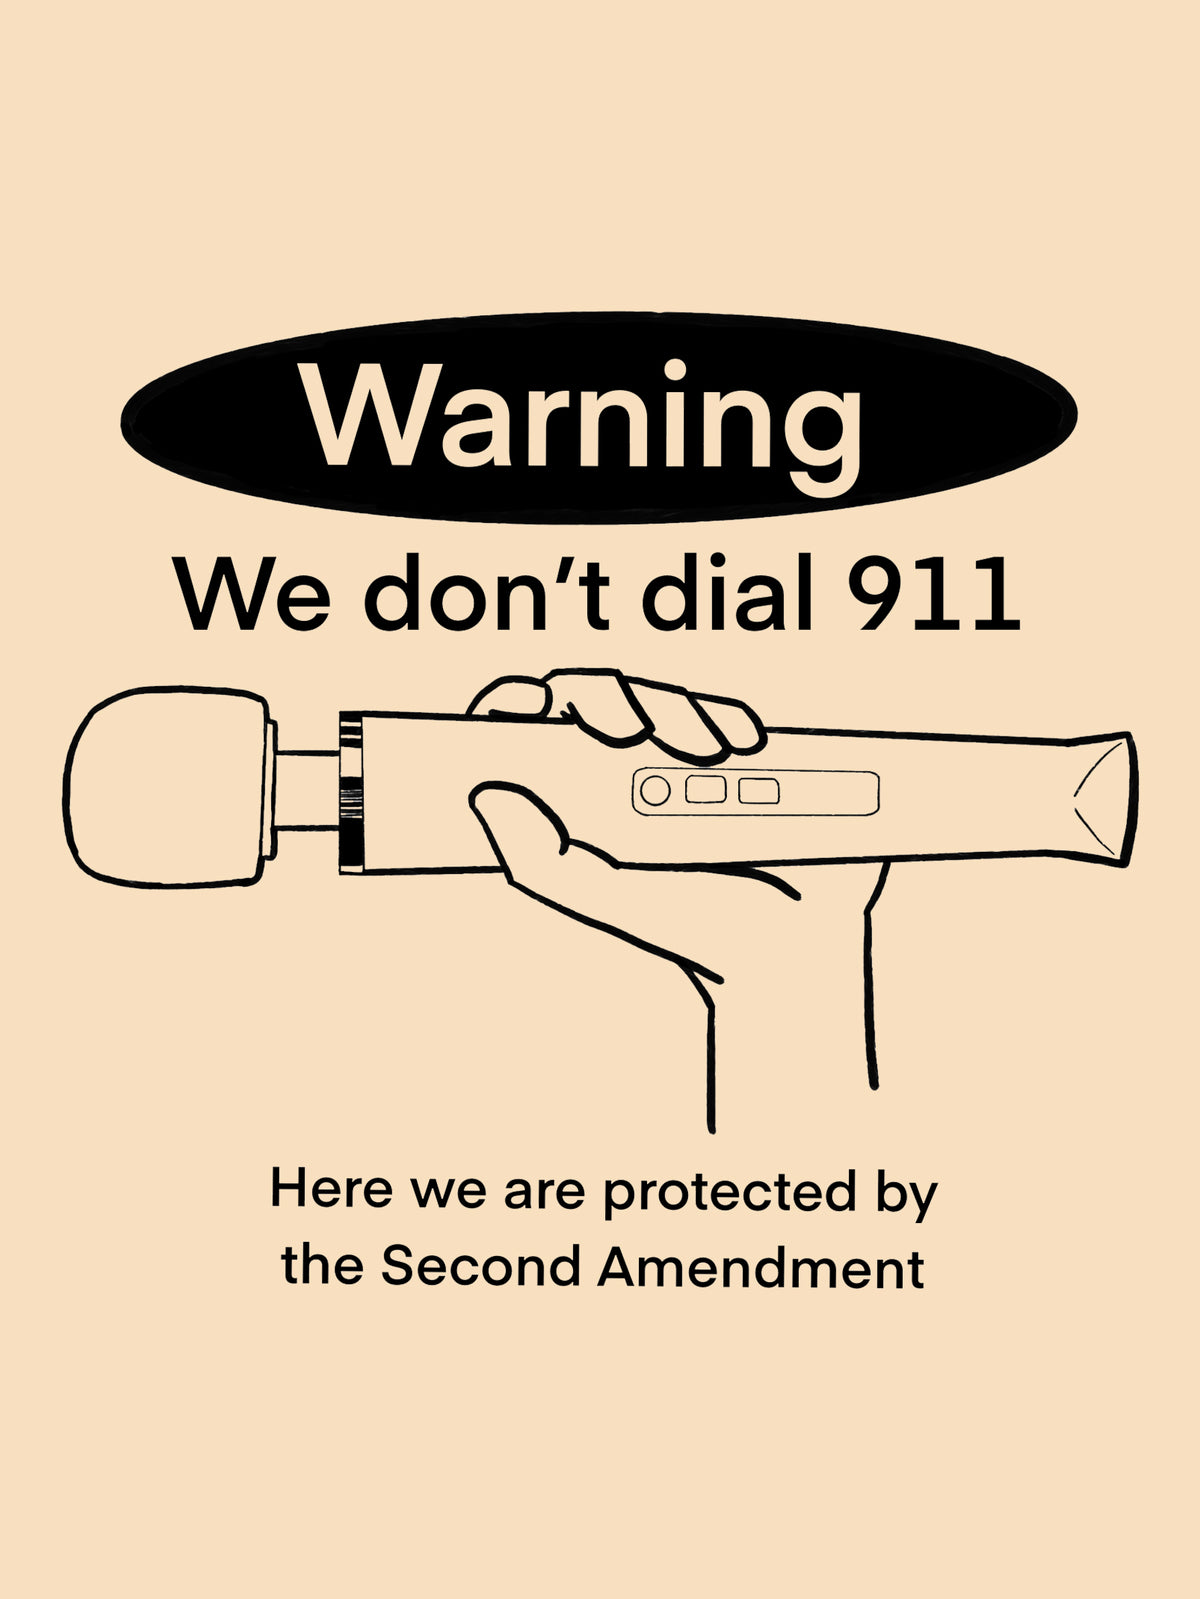 We Don’t Call 911 Here by Dirty Laundry